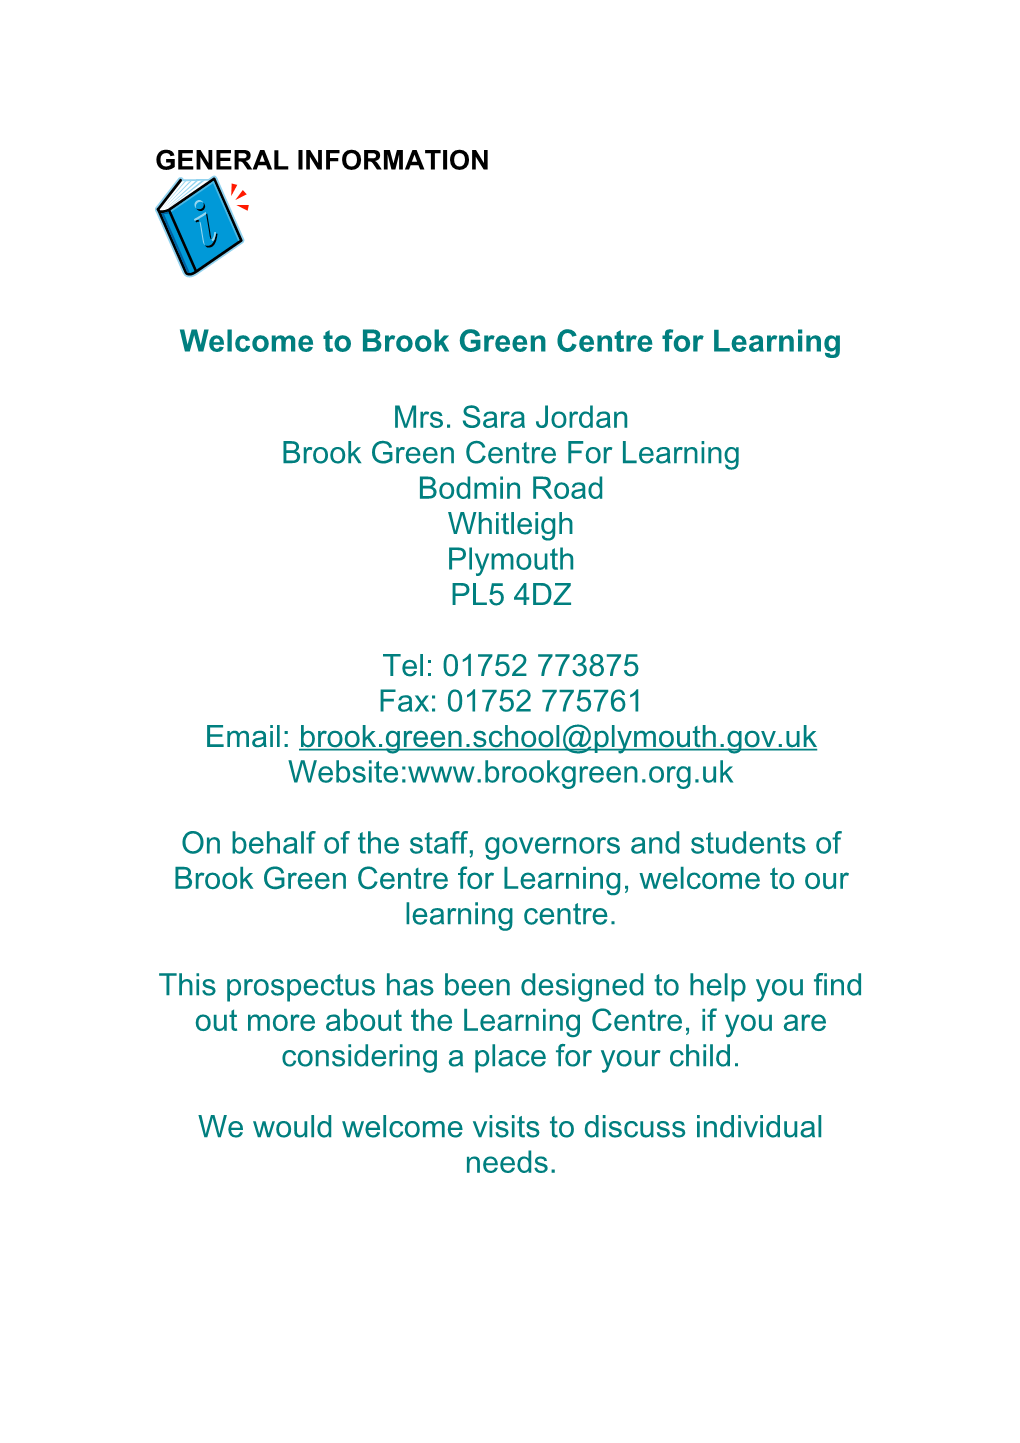 Welcome to Brook Green Centre for Learning